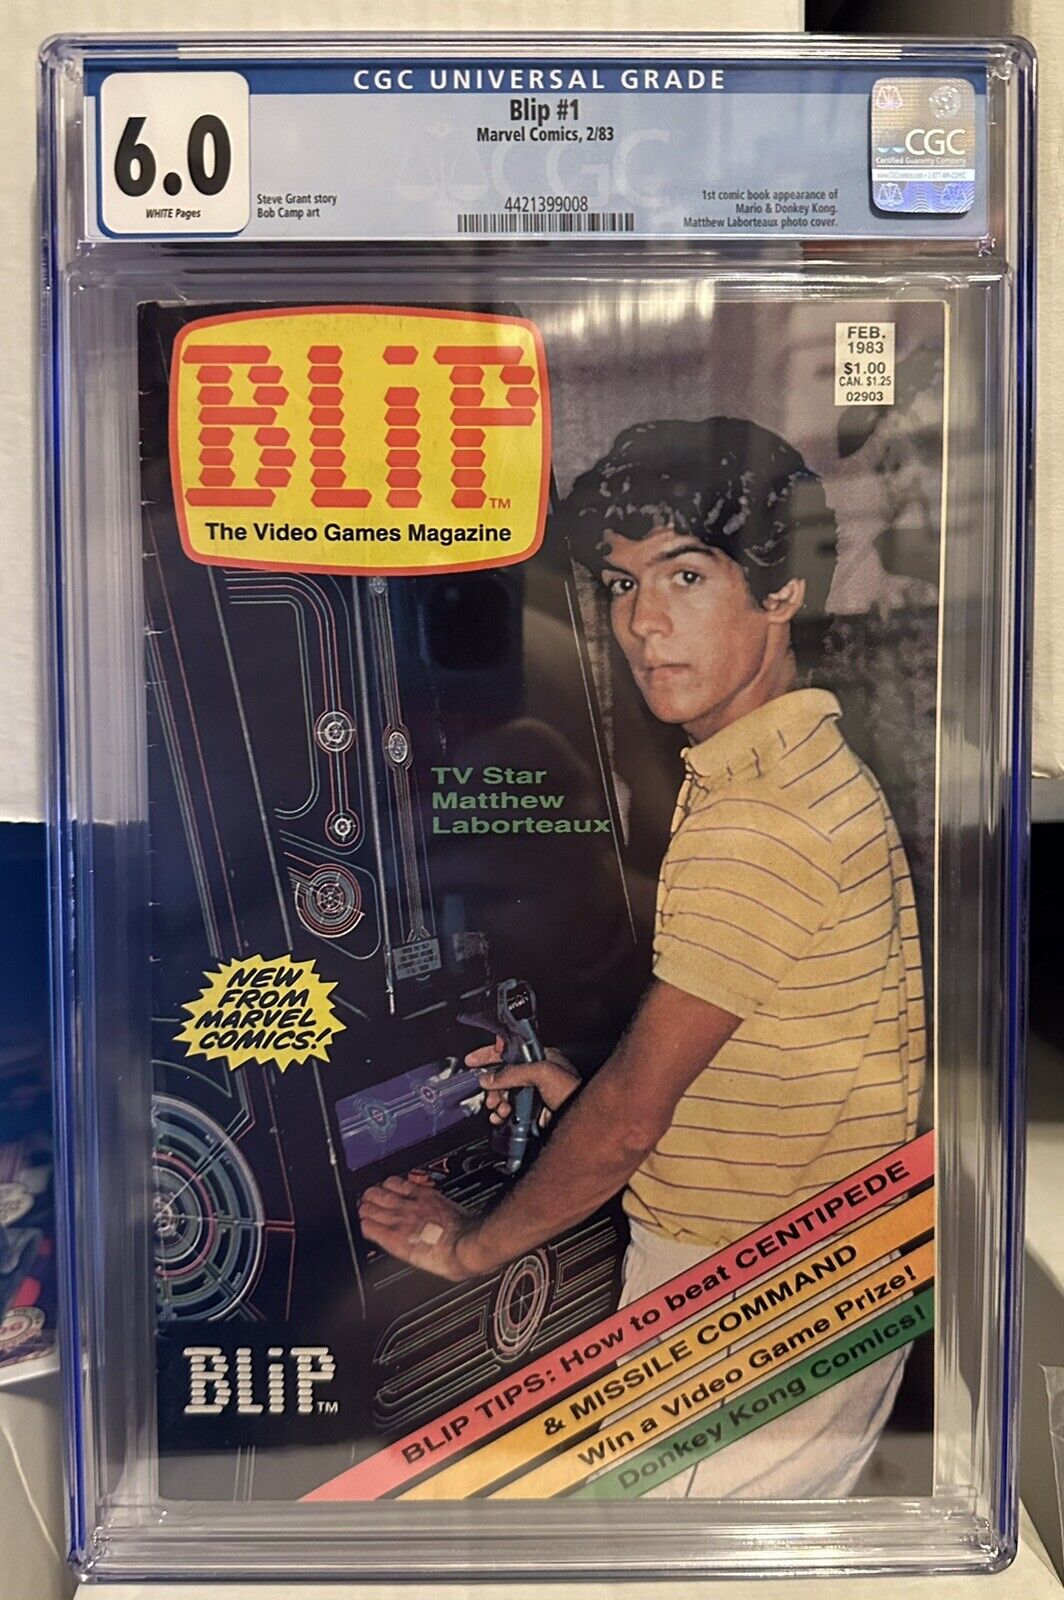 Blip 1 - First Comic Book Appearance of Mario and Donkey Kong CGC 6.0 1983